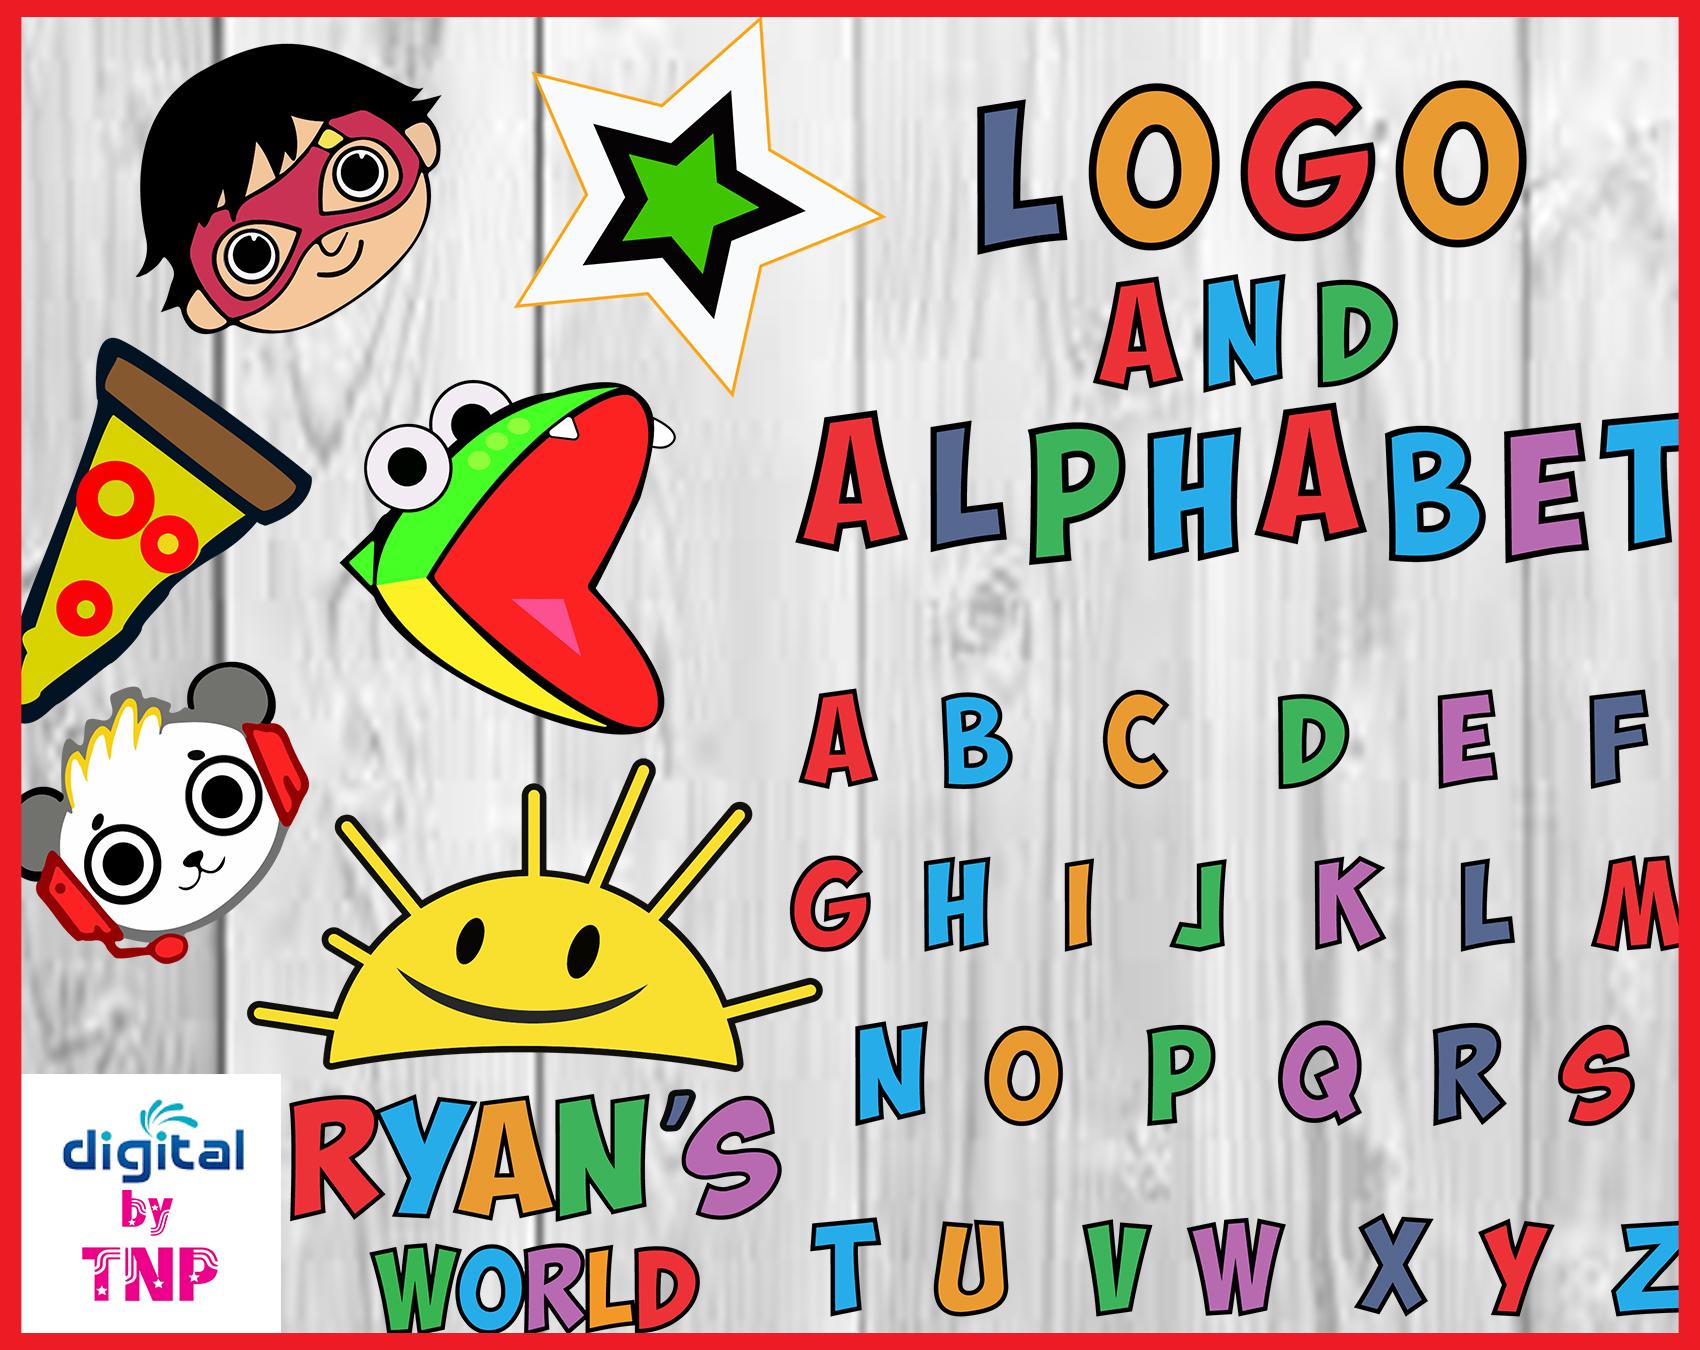 Download Ryans World Logo With Full Alphabet Svg Shirt Cup Sippy Sunshine Panda Pizza Lizard Super Kid Cricut Silhouette Vinyl Printable Customer Satisfaction Is Our Priority